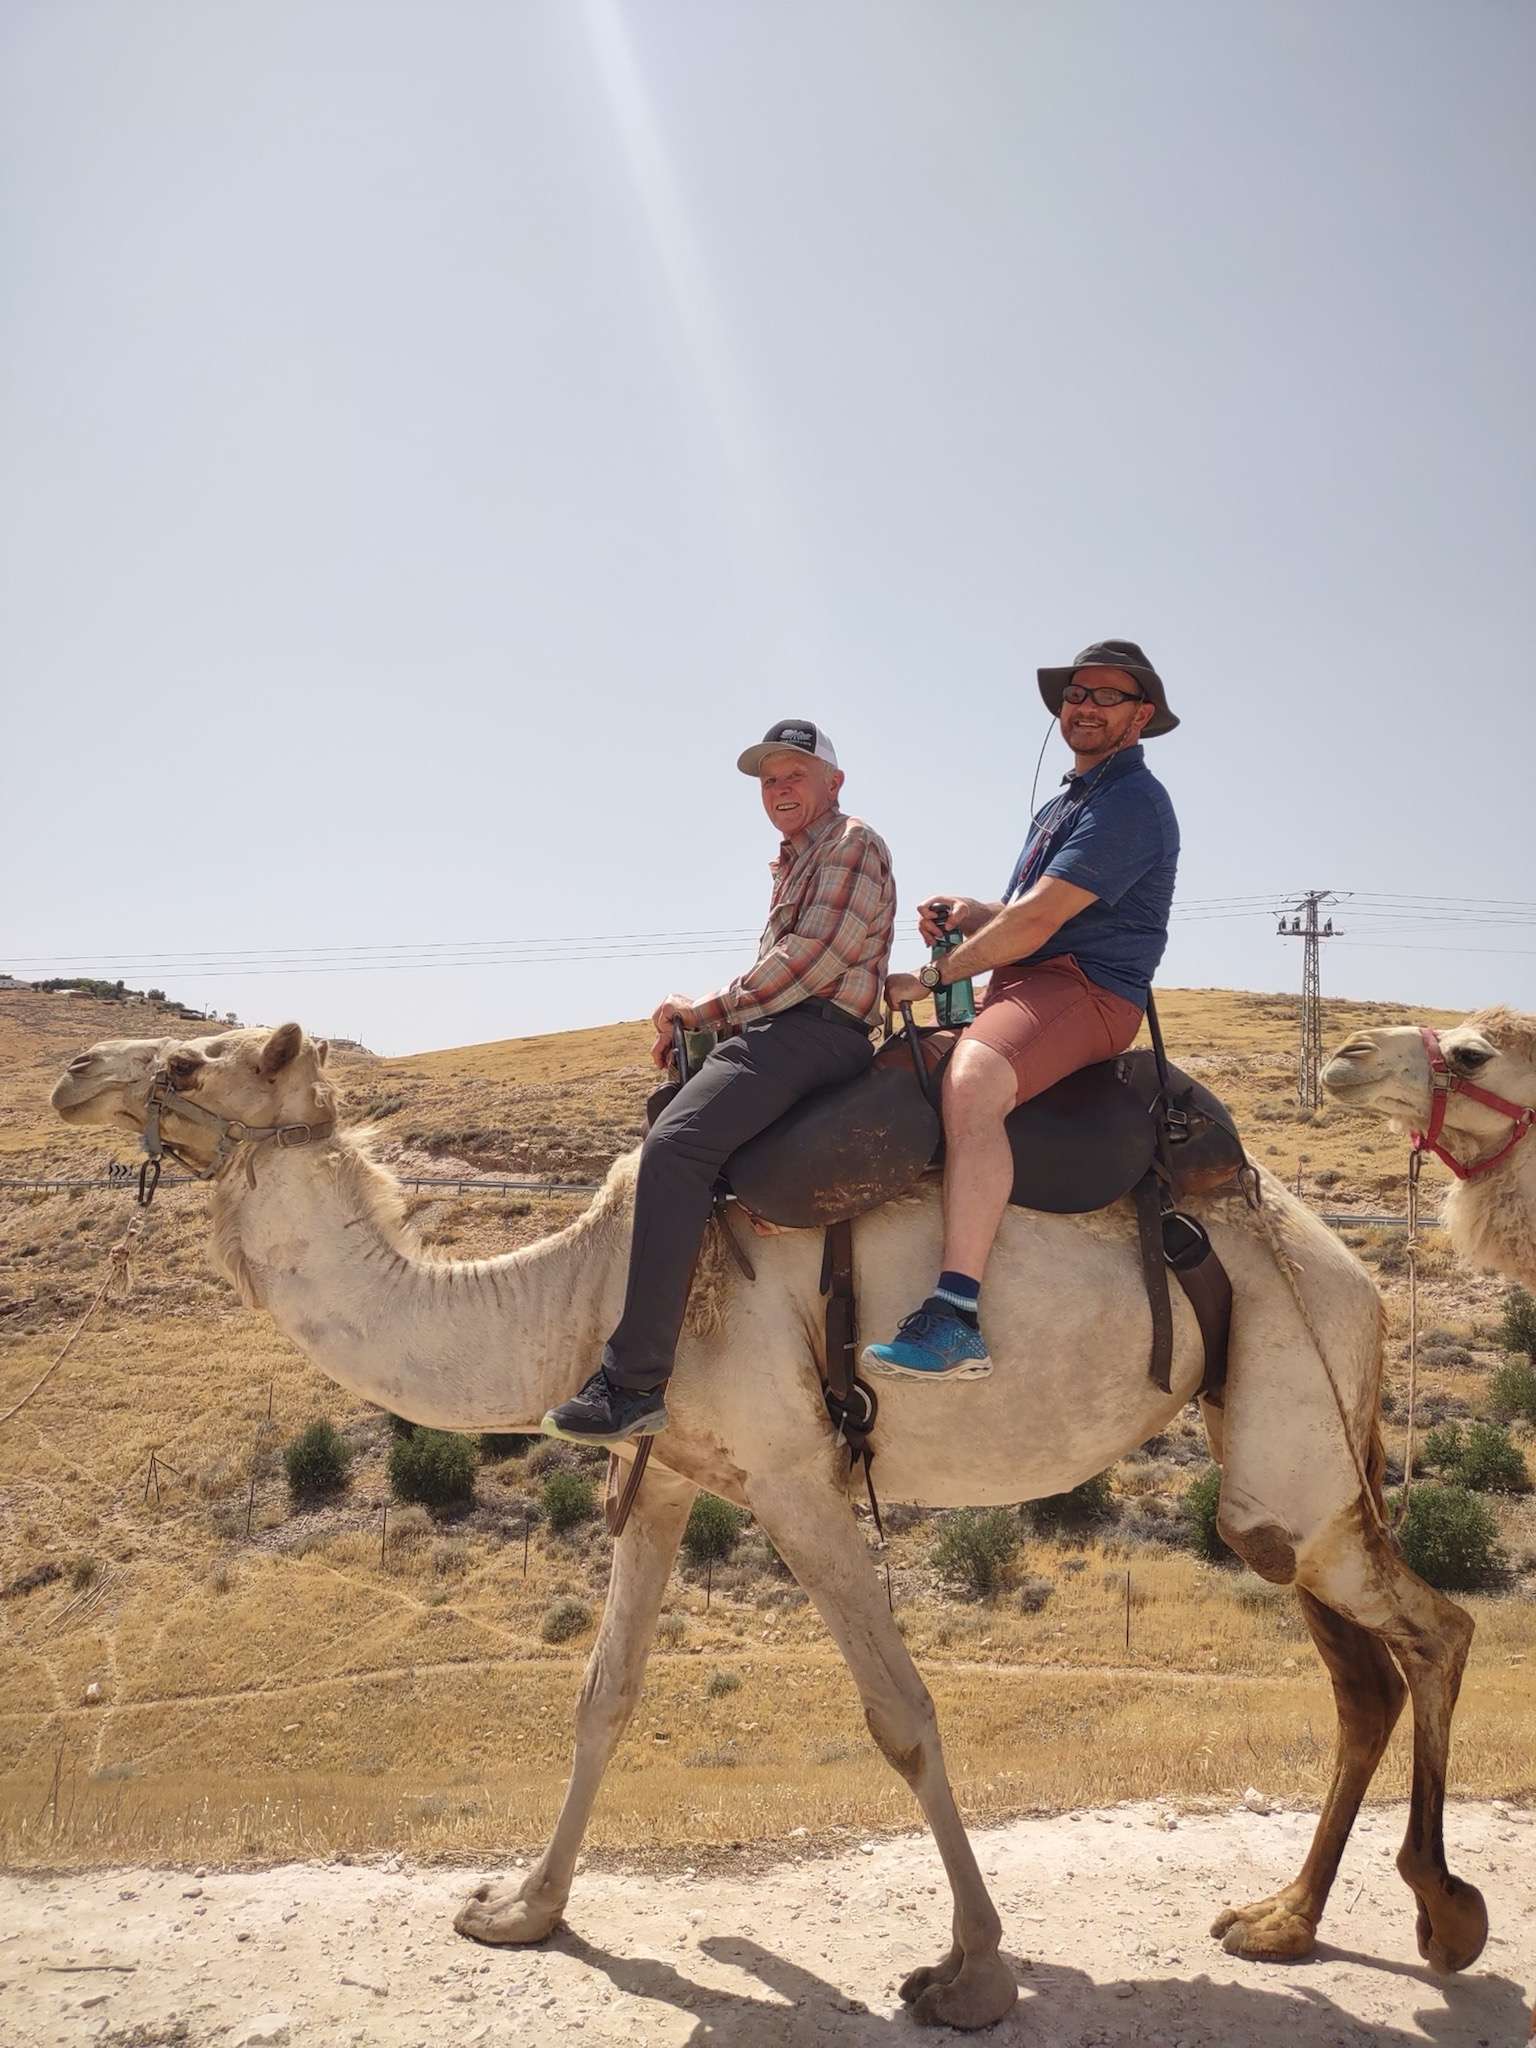 Richard and youngest son Jake on a camel